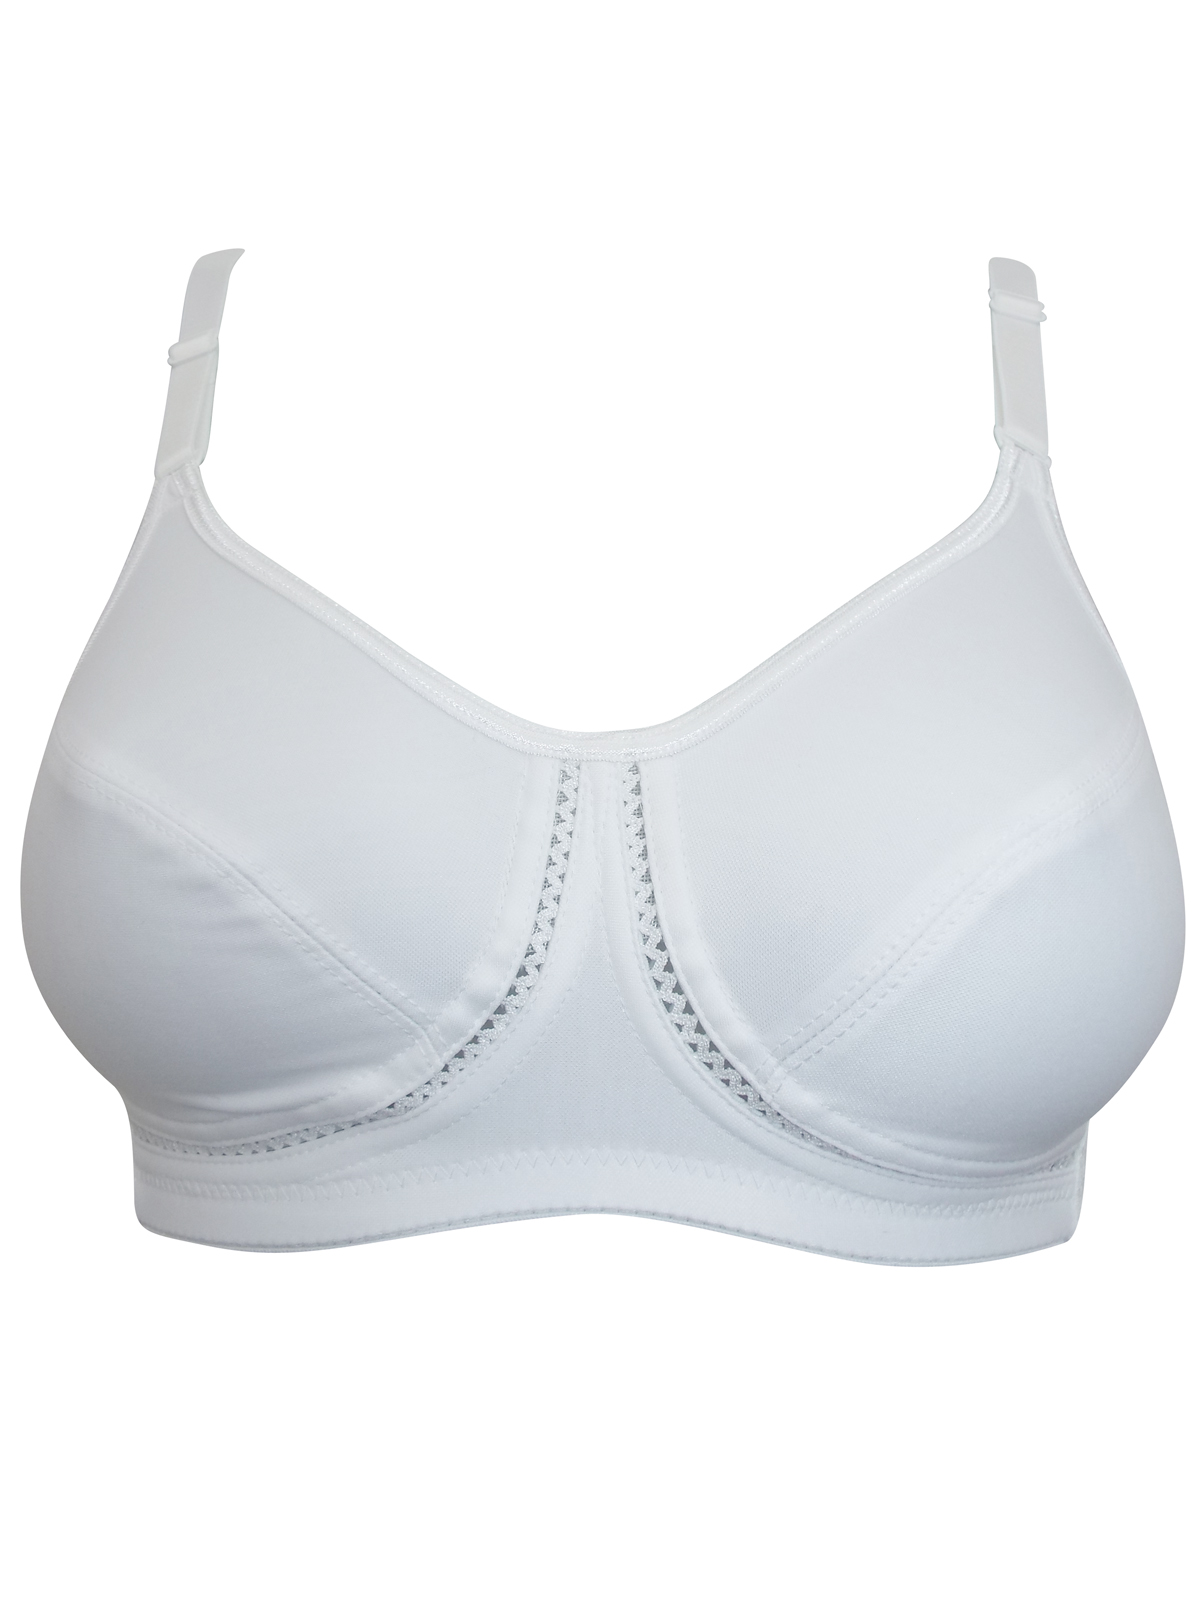 Marks and Spencer - - M&5 WHITE Total Support Non-Wired Full Cup Bra ...